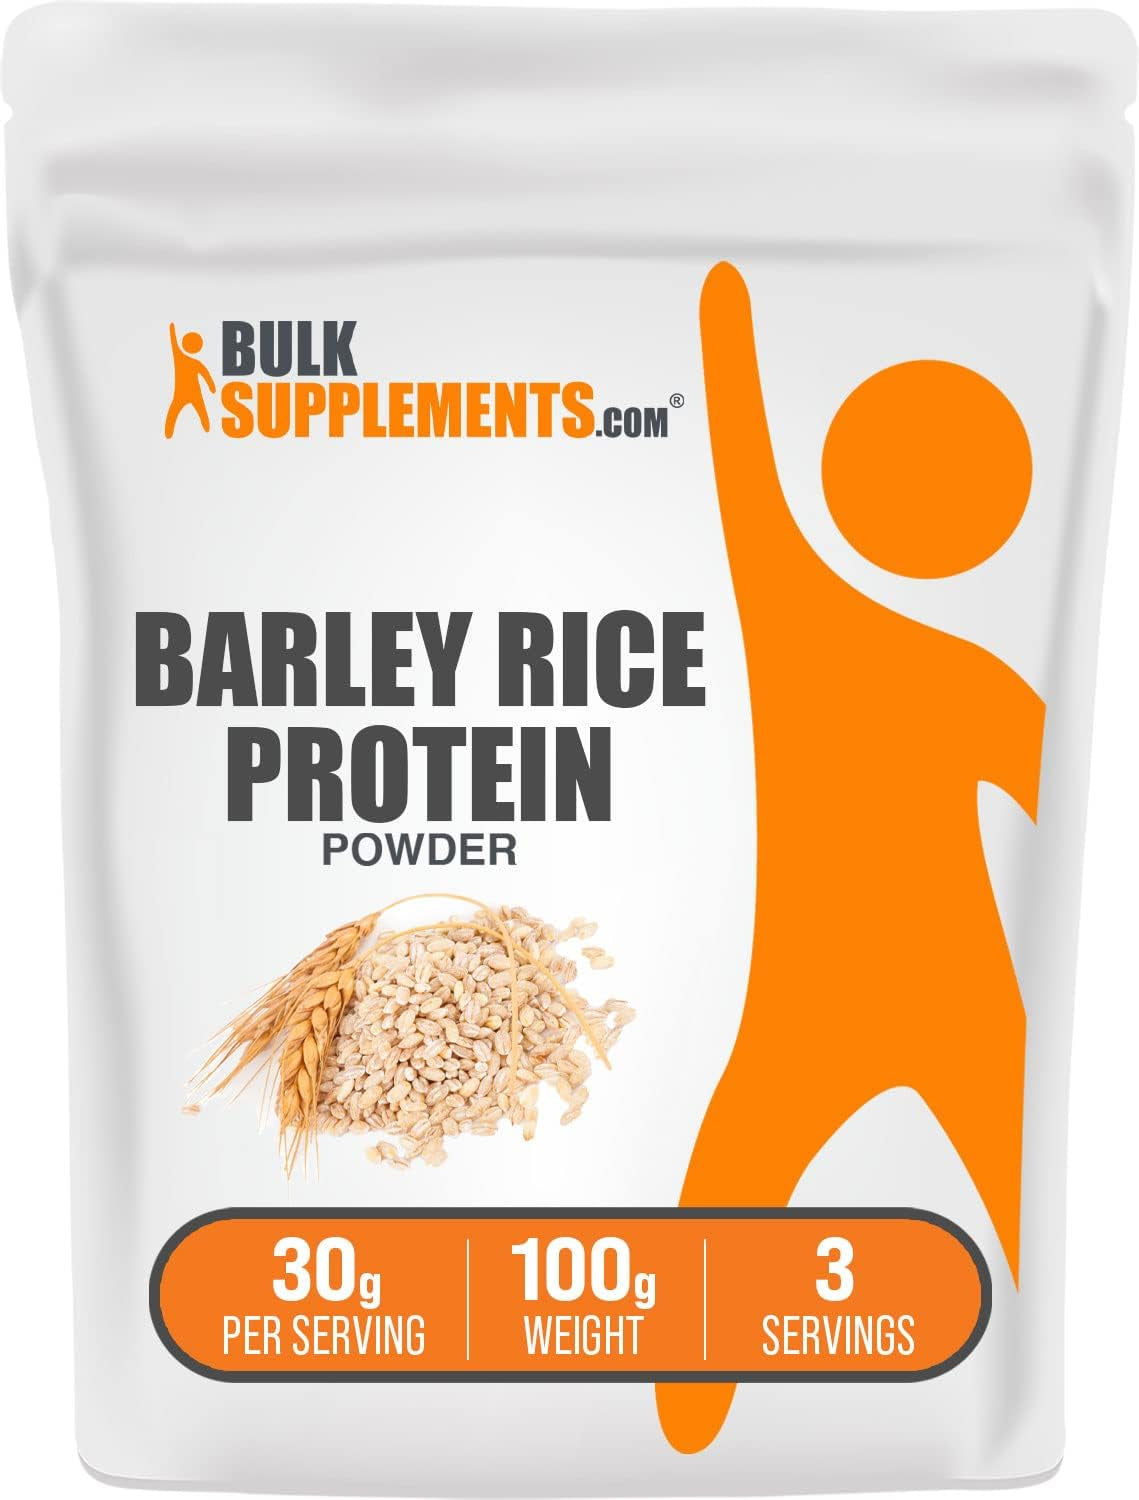 BULKSUPPLEMENTS.COM Barley Rice Protein Powder - Post-Workout Muscle Builder - Dairy Free, Soy Free - 30 Grams per Serving (100 Grams - 3.5 Oz)